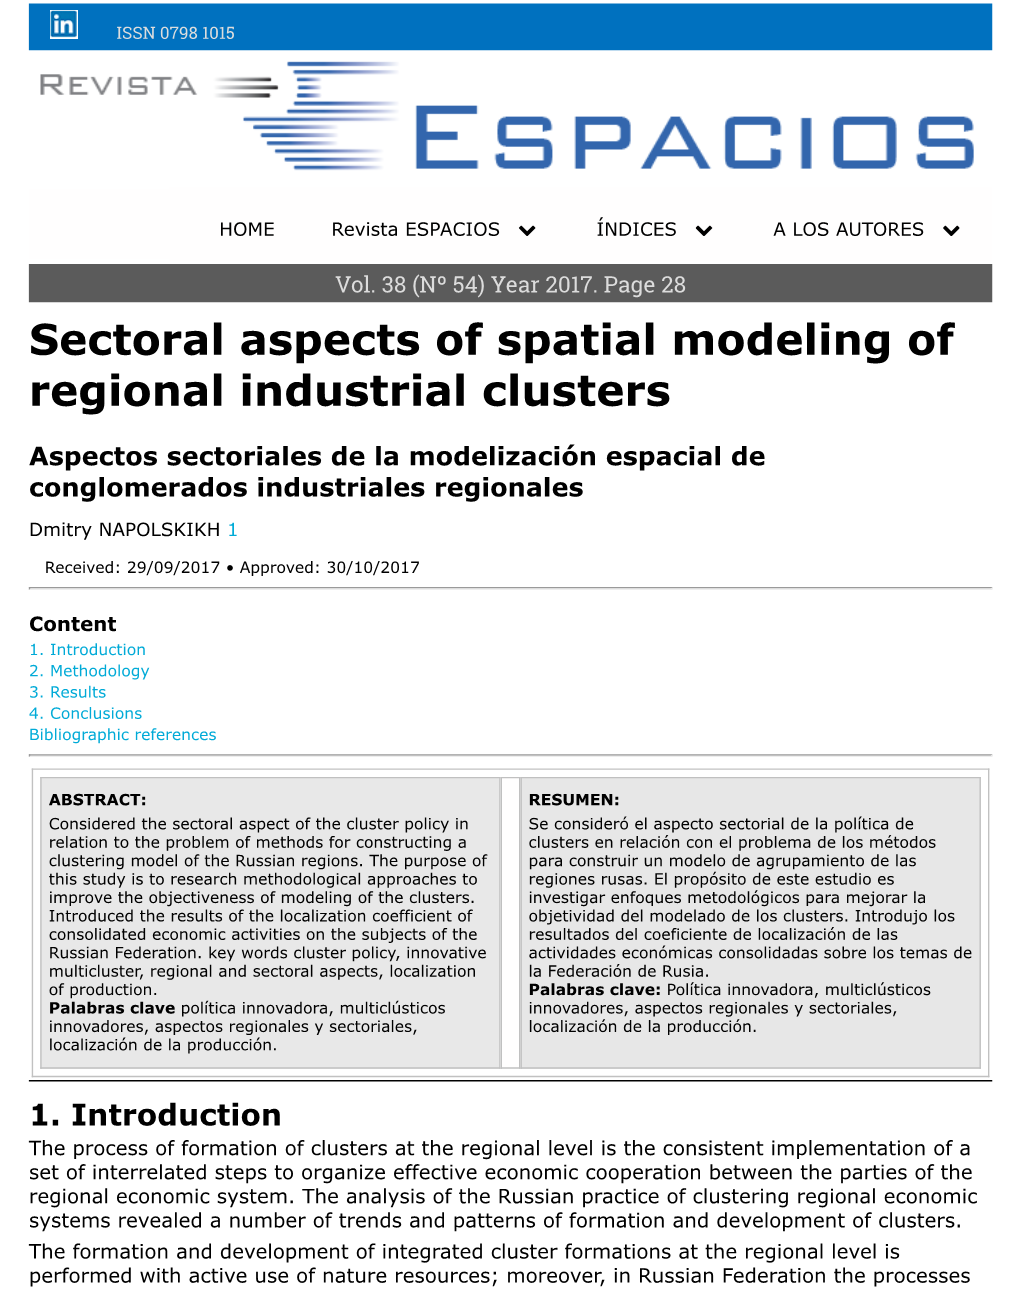 Sectoral Aspects of Spatial Modeling of Regional Industrial Clusters